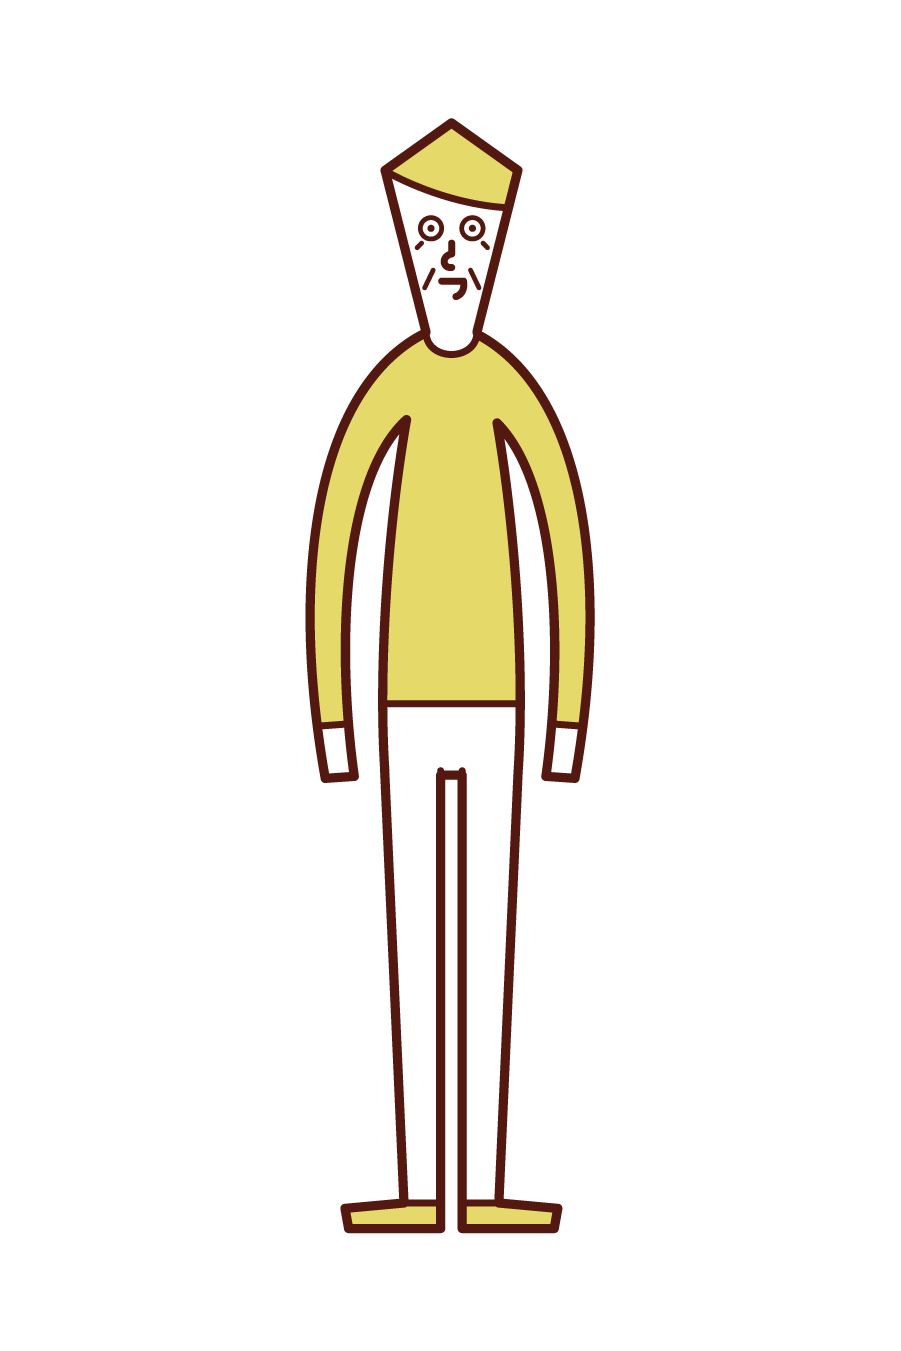 Illustration of an upright person (old man)